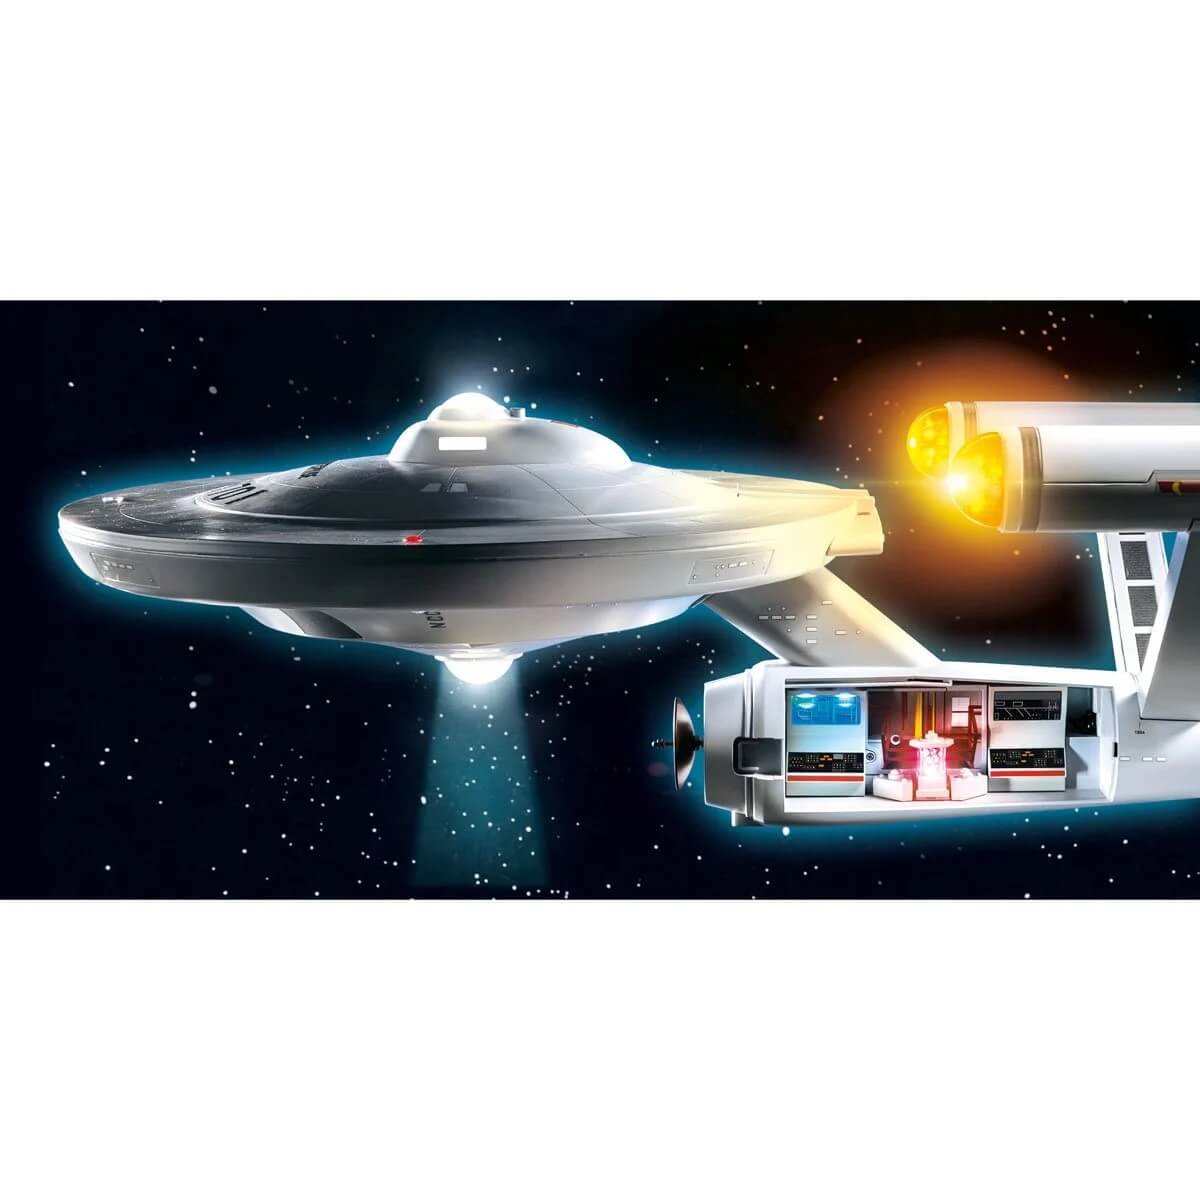 Features the bridge and nacelles lighting up on the U.S.S. Enterprise NCC-1701